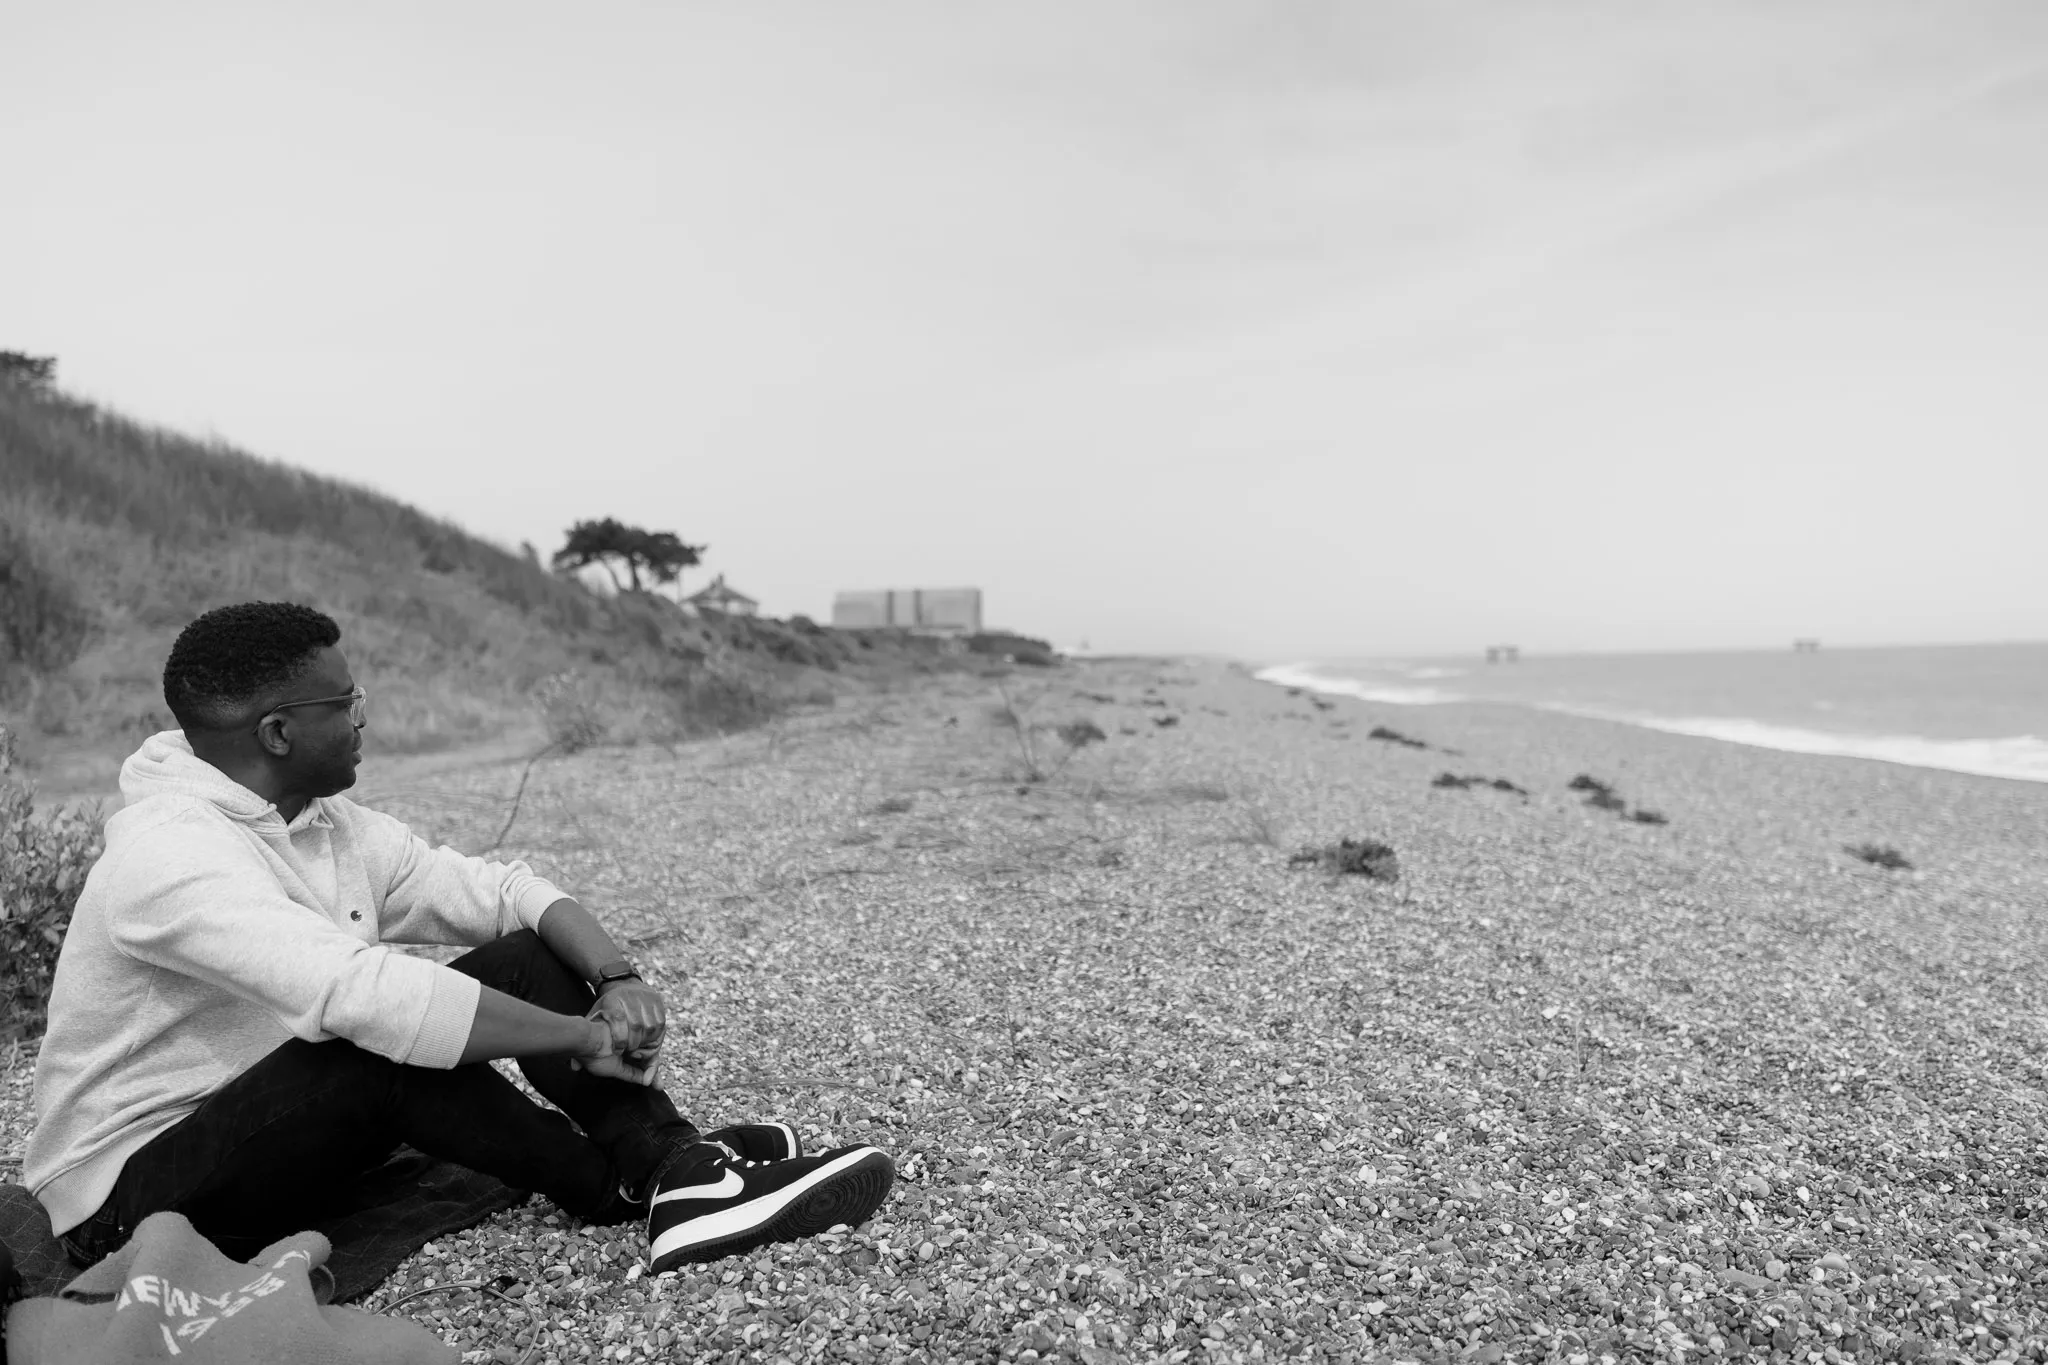 man sat down on a stoney beach with legs crossed looking away the camera, deep in thought.